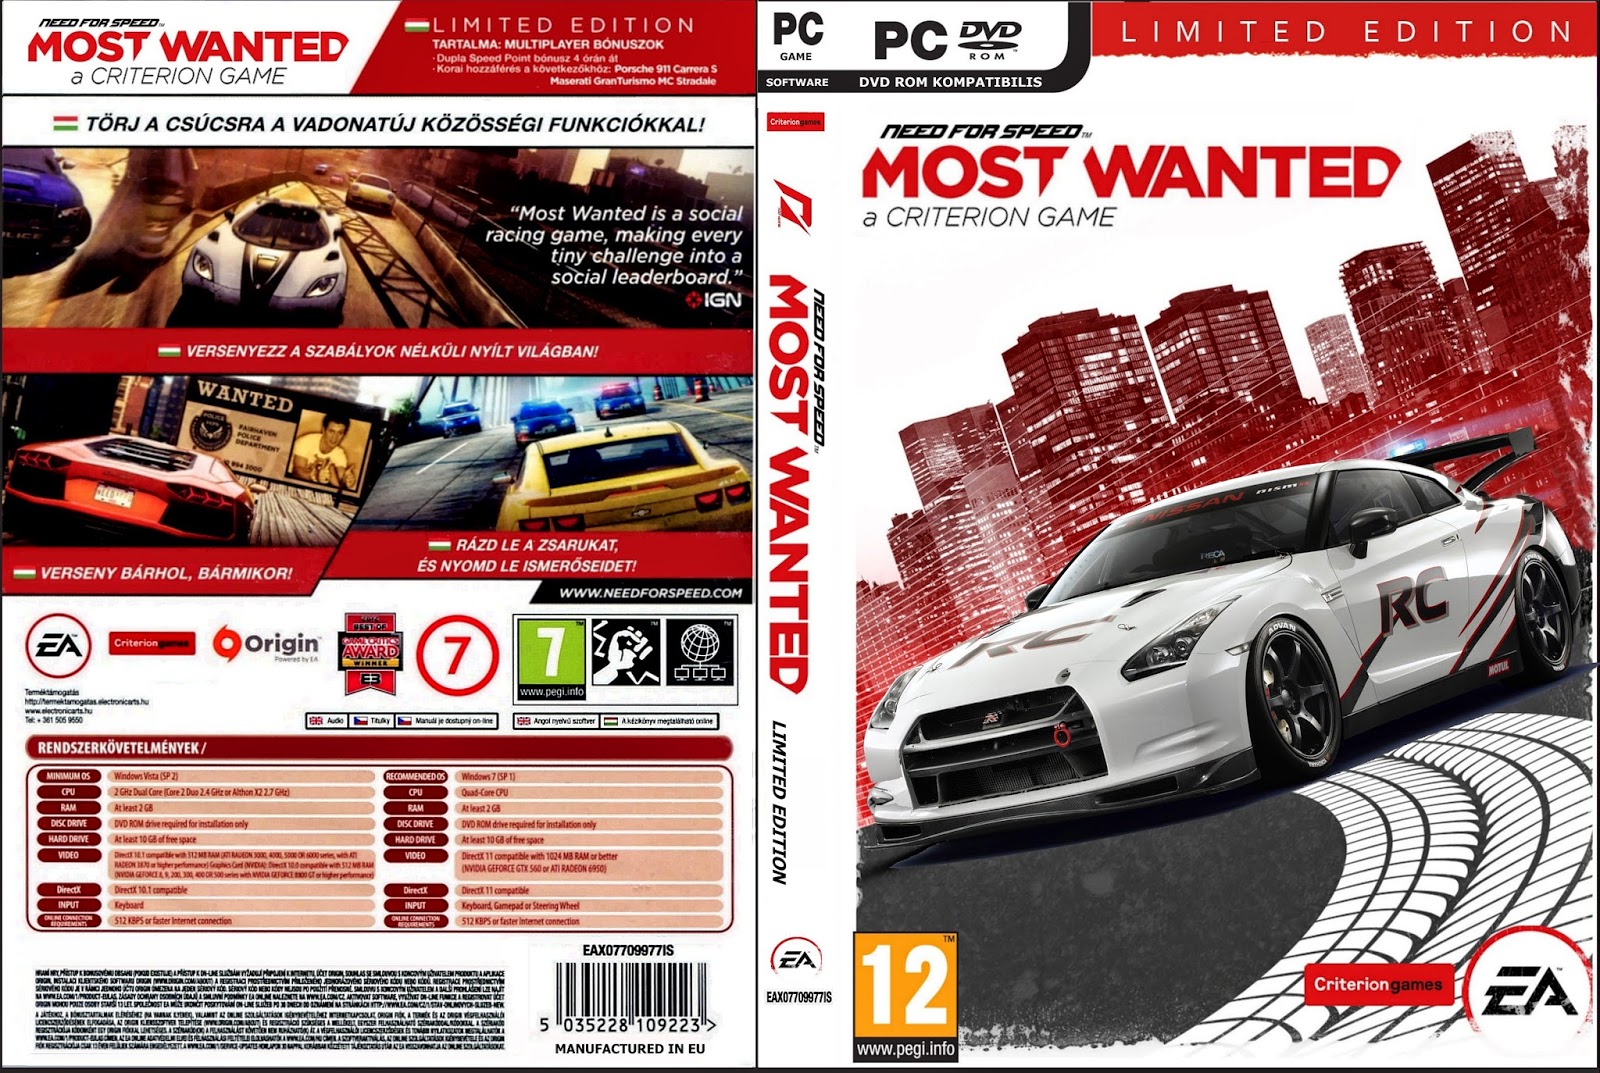 download torrent nfs most wanted